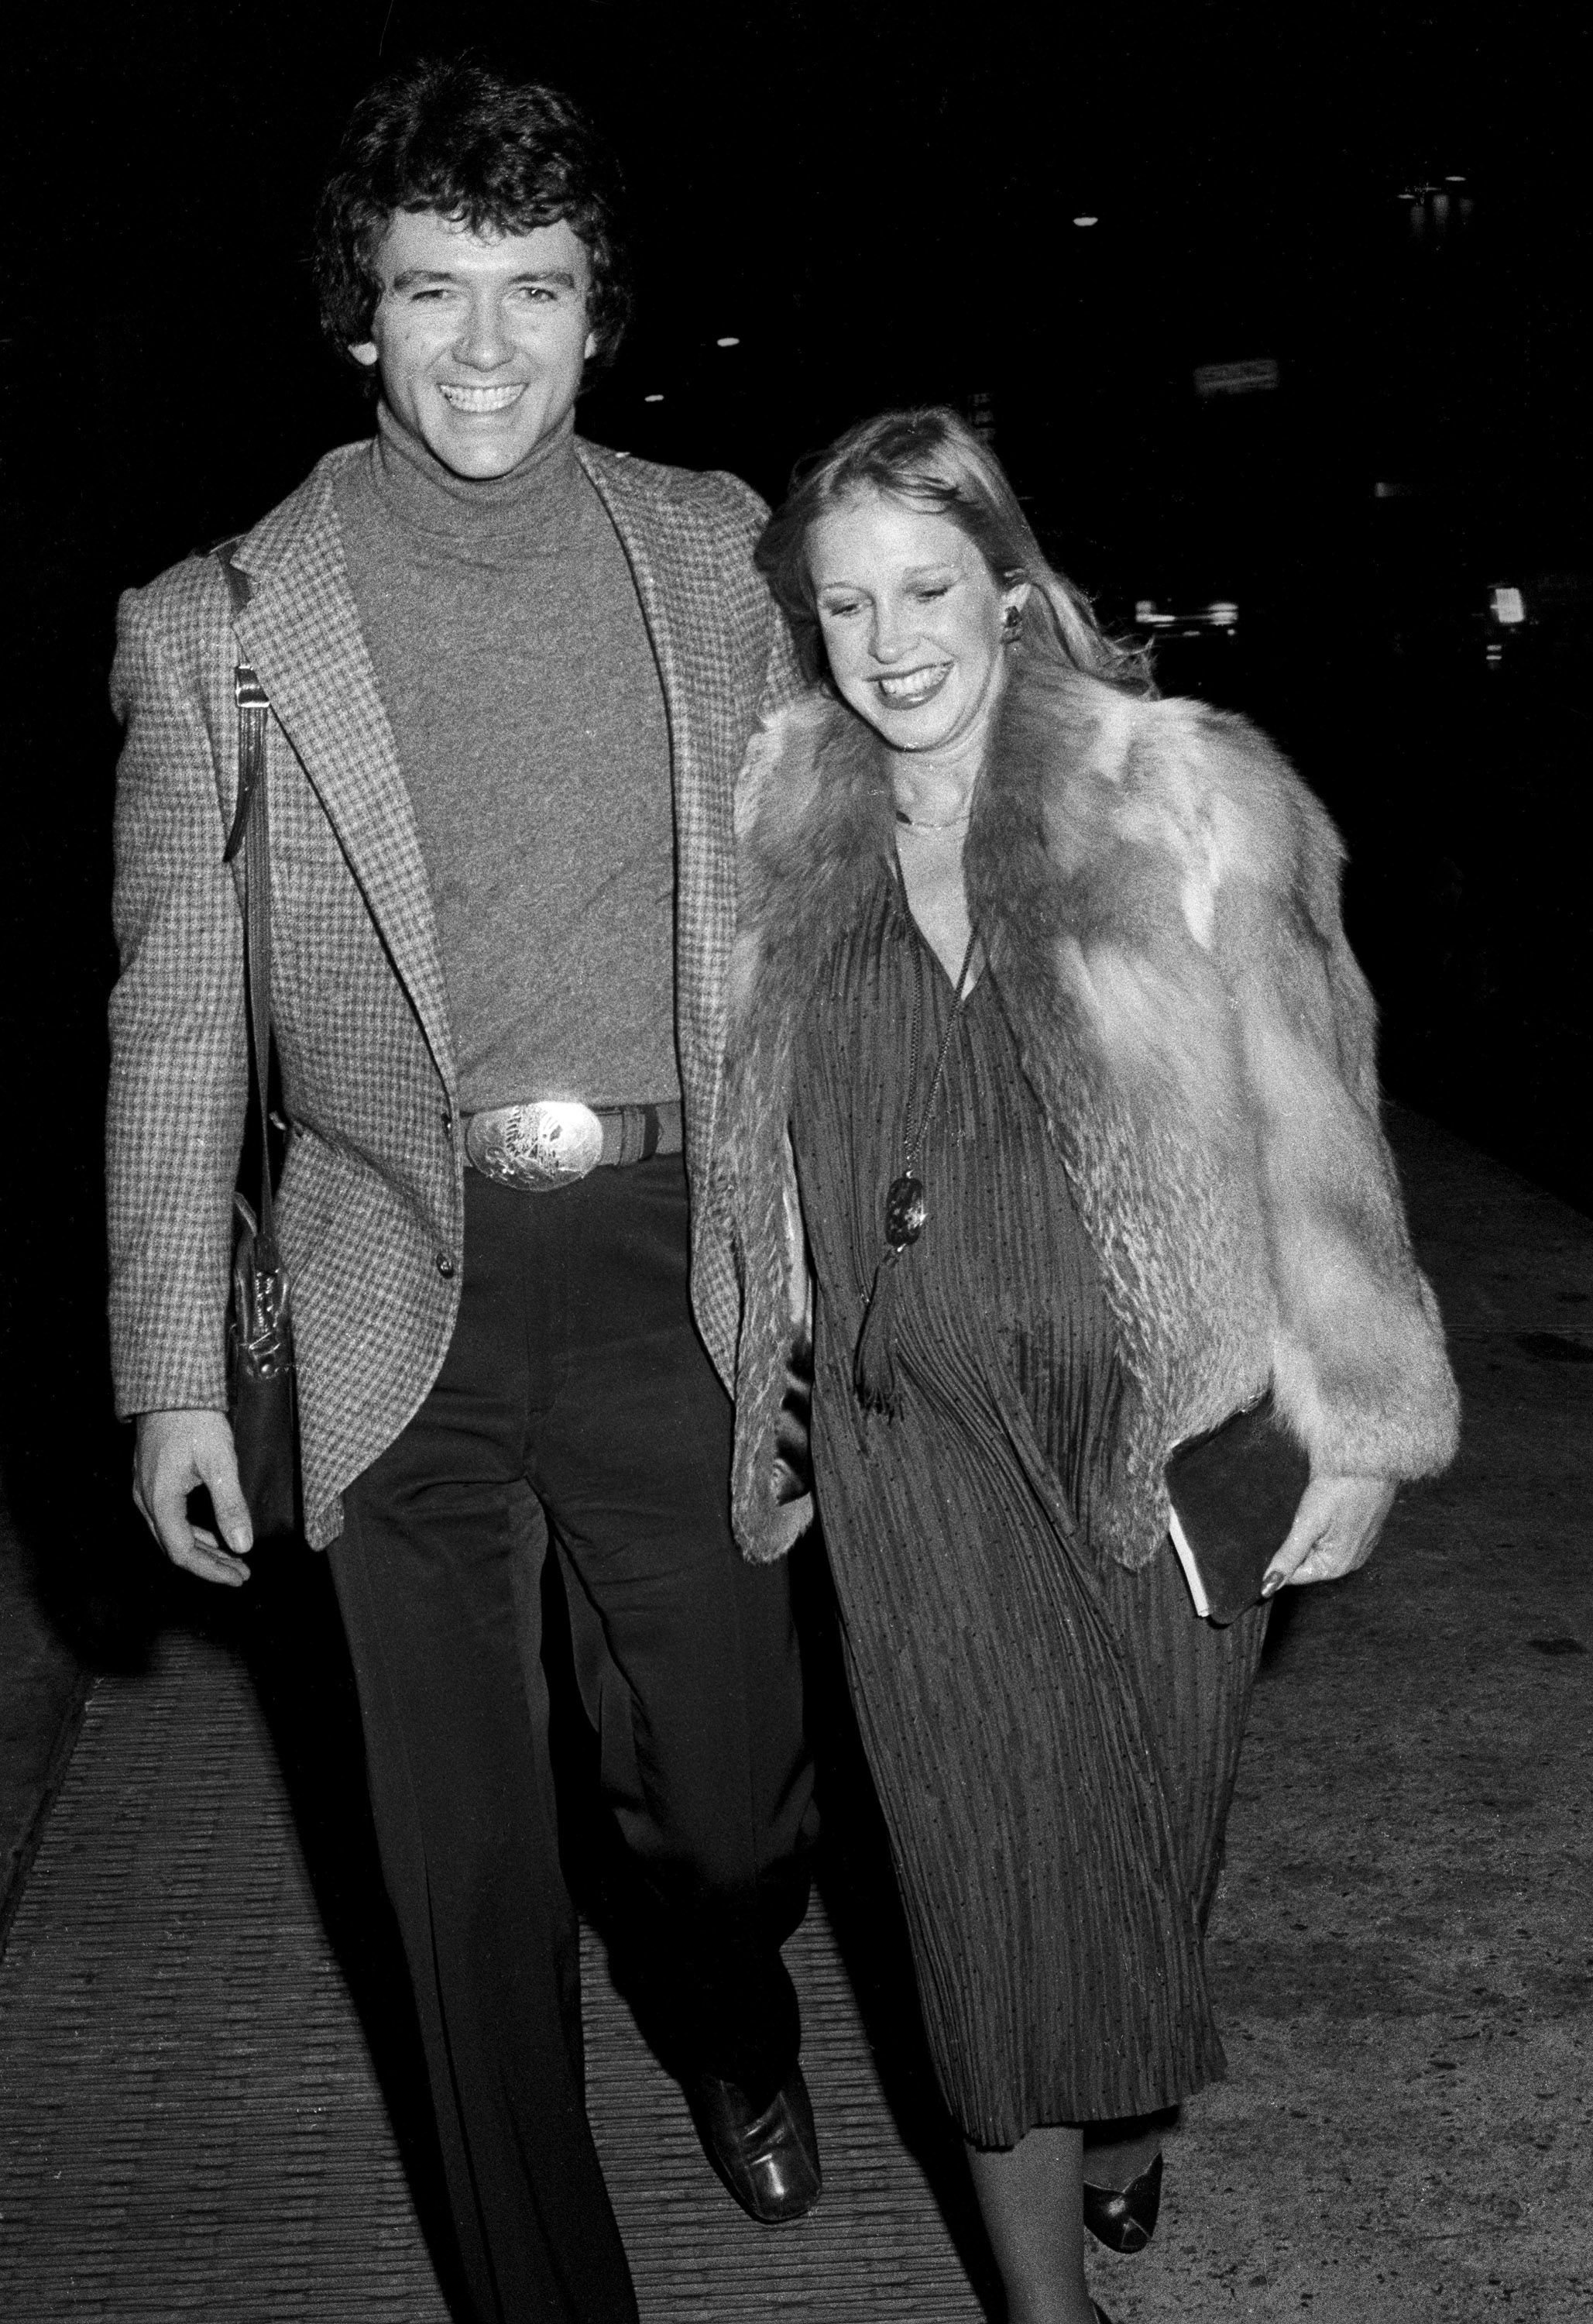 Patrick Duffy and his wife Carlyn at the musical "Sweeney Todd," in November 1979 in New York.┃Source: Getty Images